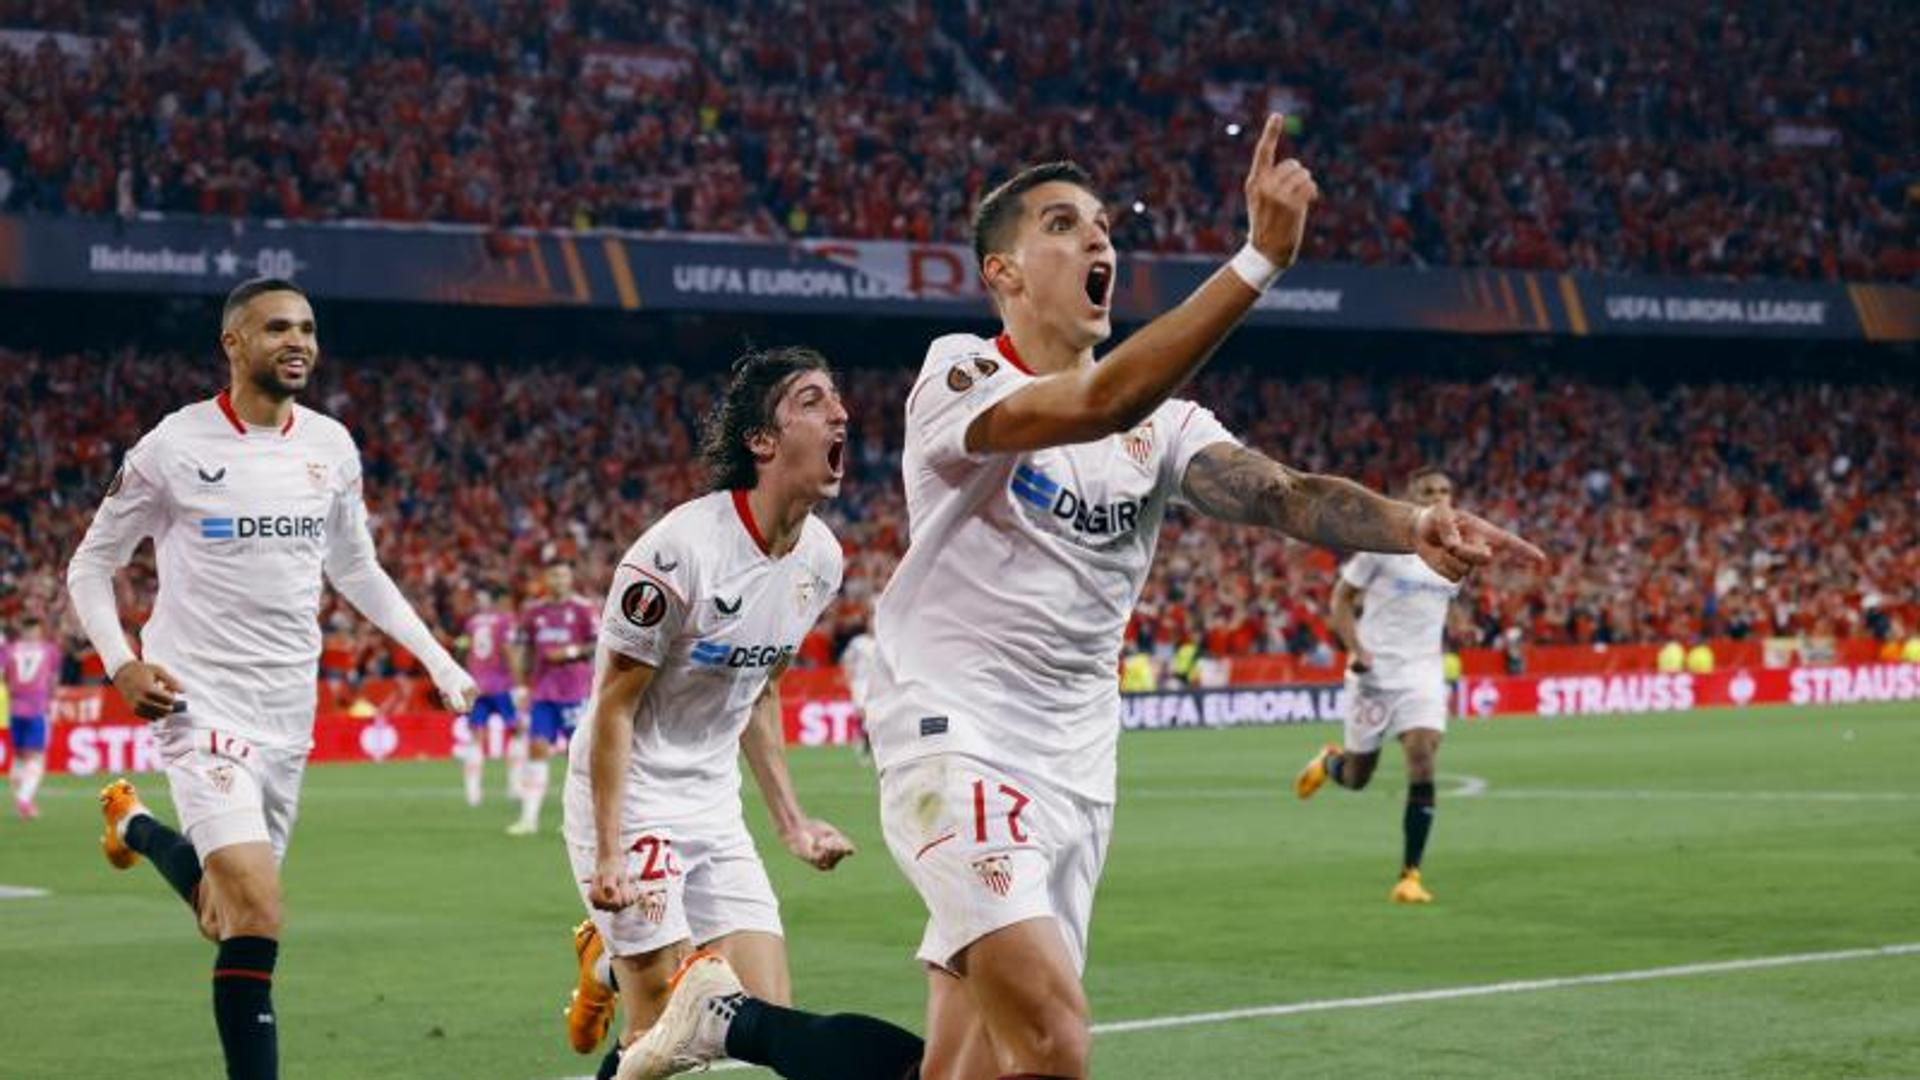 Sevilla is once again one step away from glory